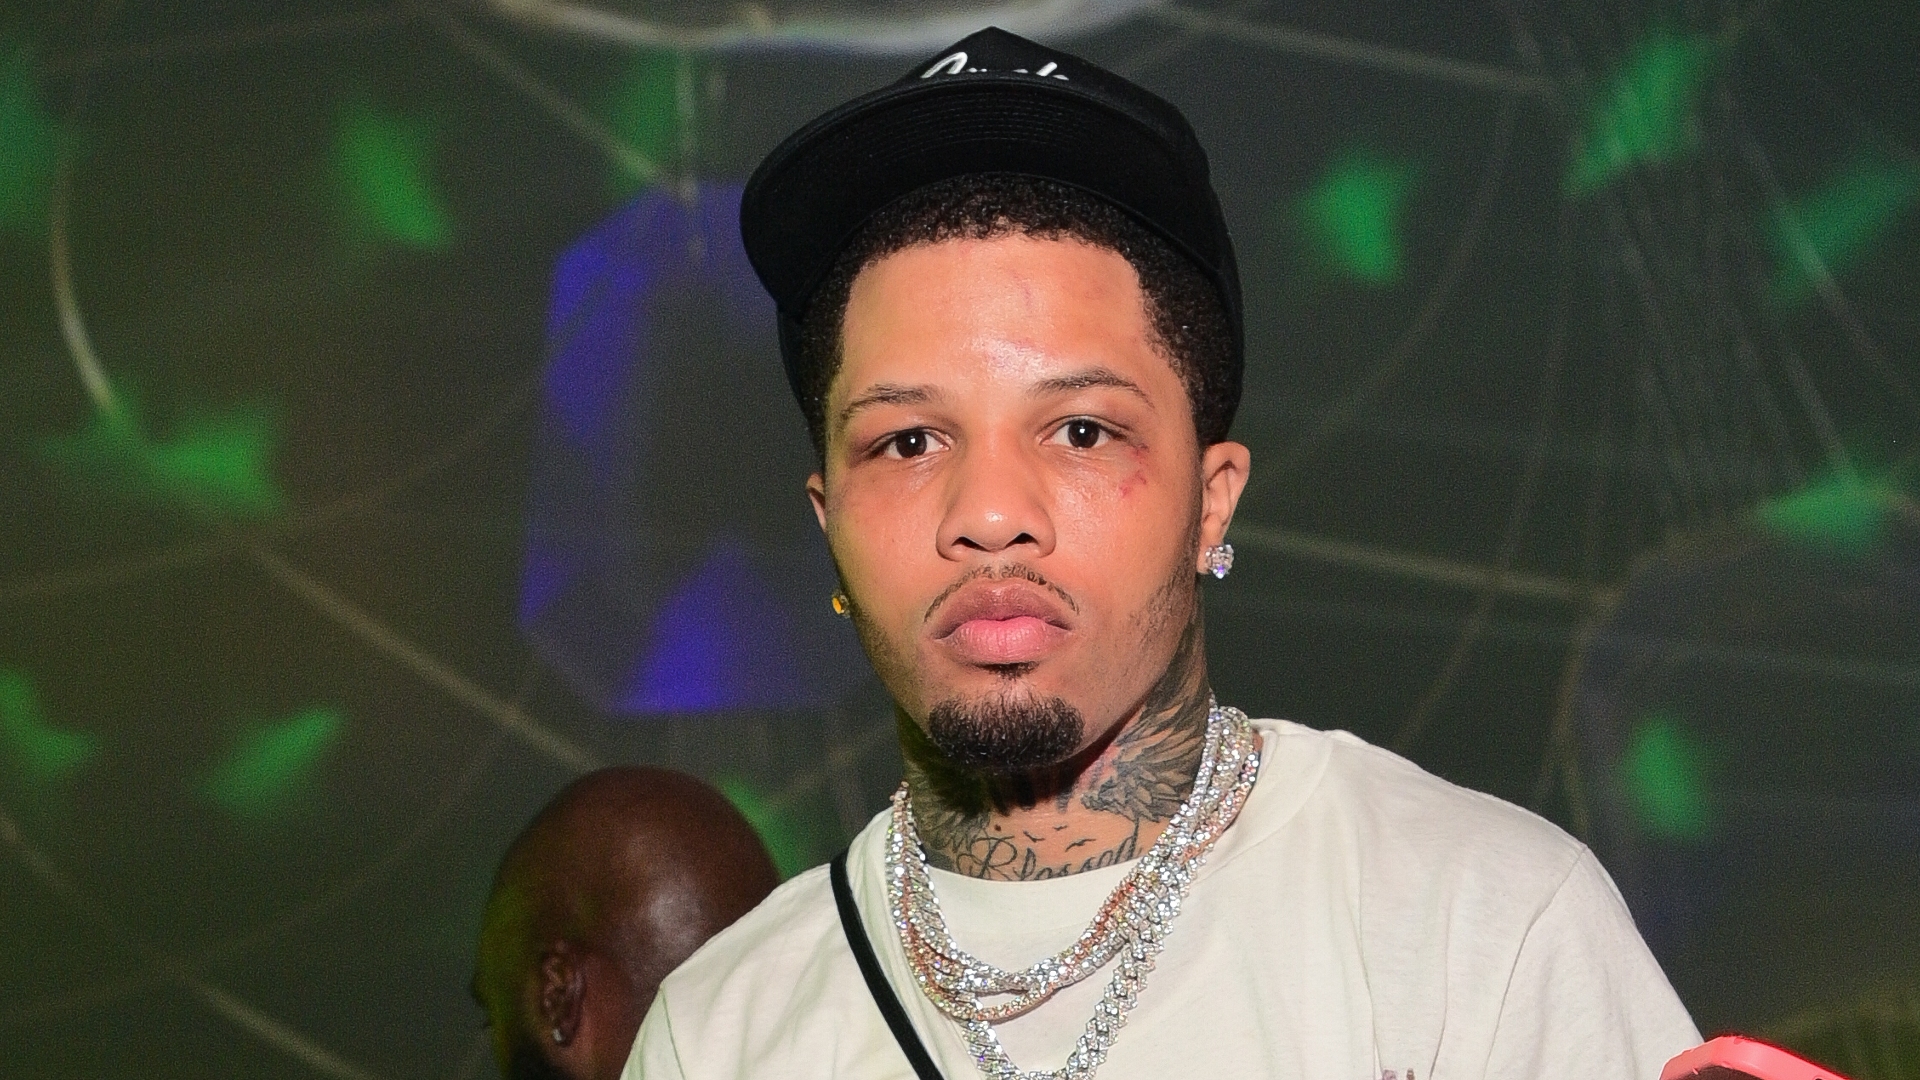 New Beginning Gervonta Davis Converts To Islam And Reveals His Muslim Name